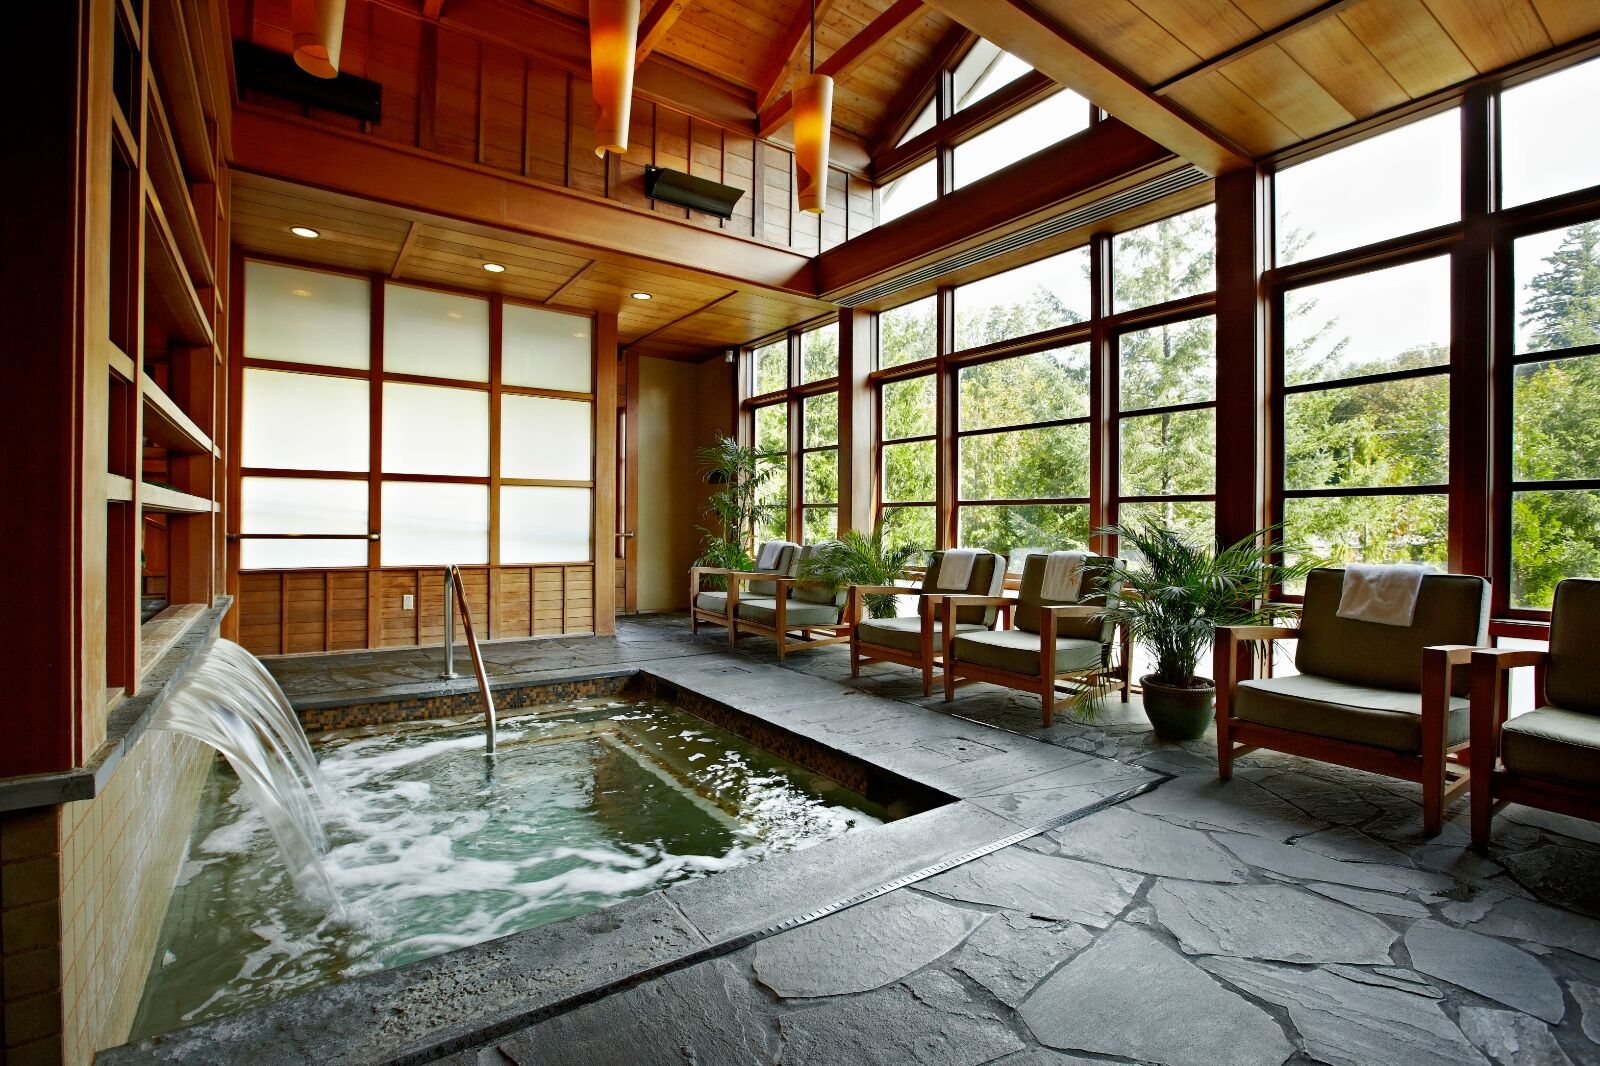 Salish Lodge one of the best spas in the world